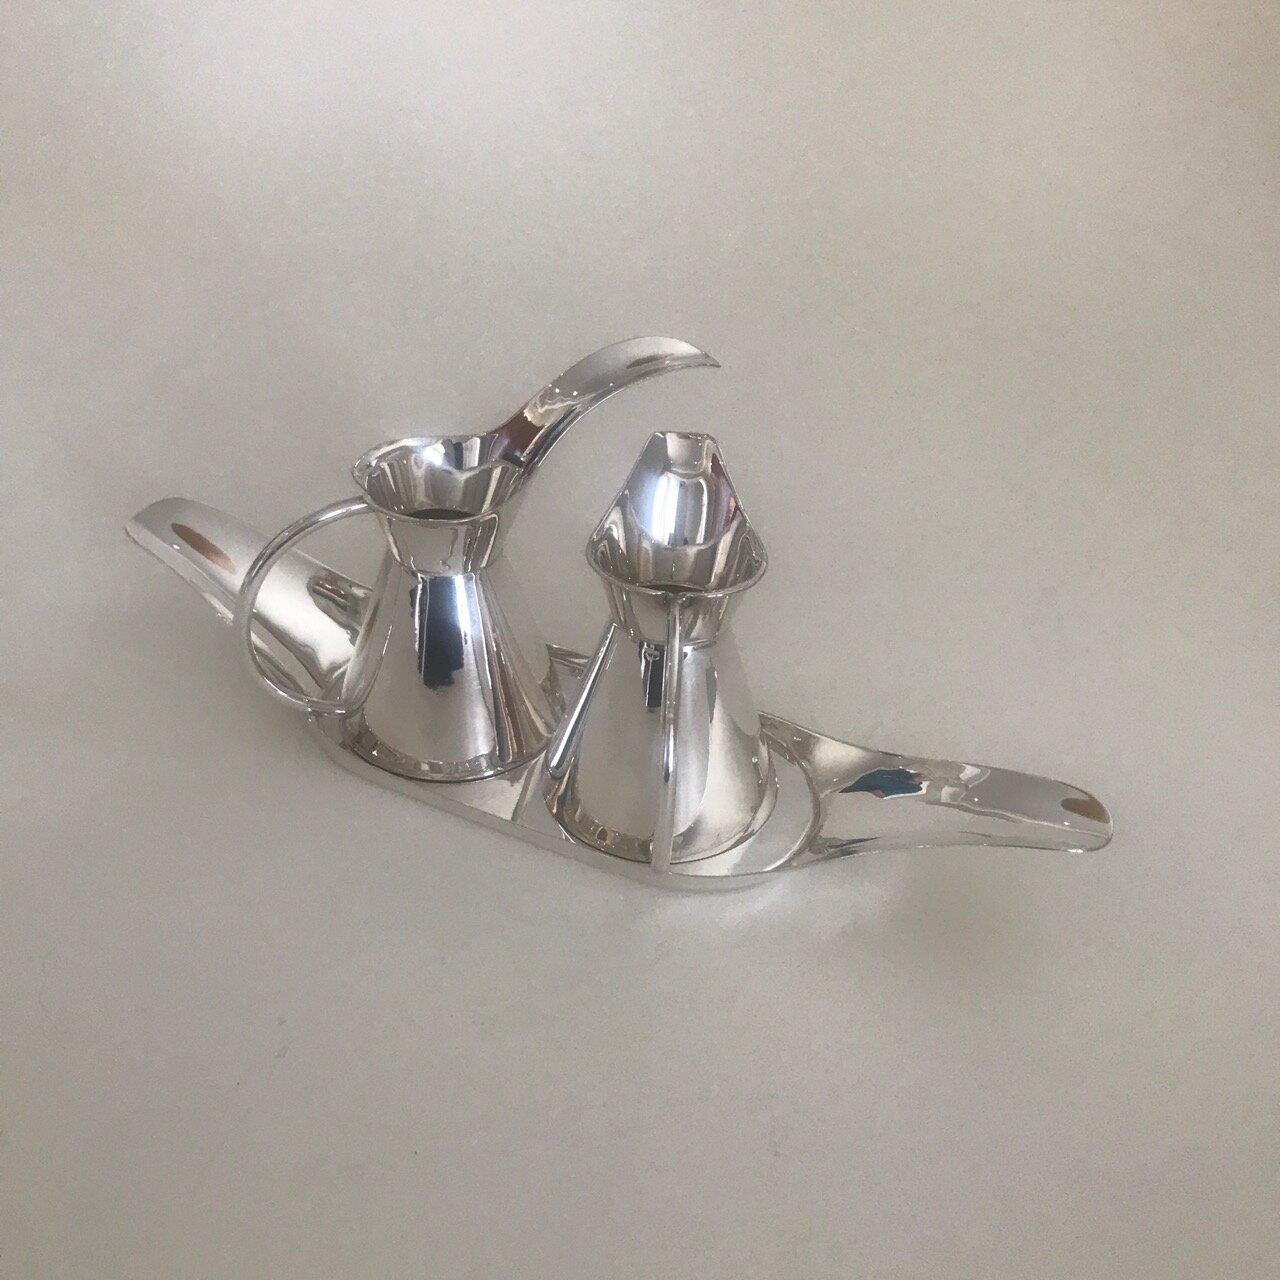 Mexican sterling silver condiment set by Sanborn

Two loop handled decanters resting on a long narrow tray with upraised handles to each end. 

Charming midcentury design. Multi purpose.

Made in Mexico.